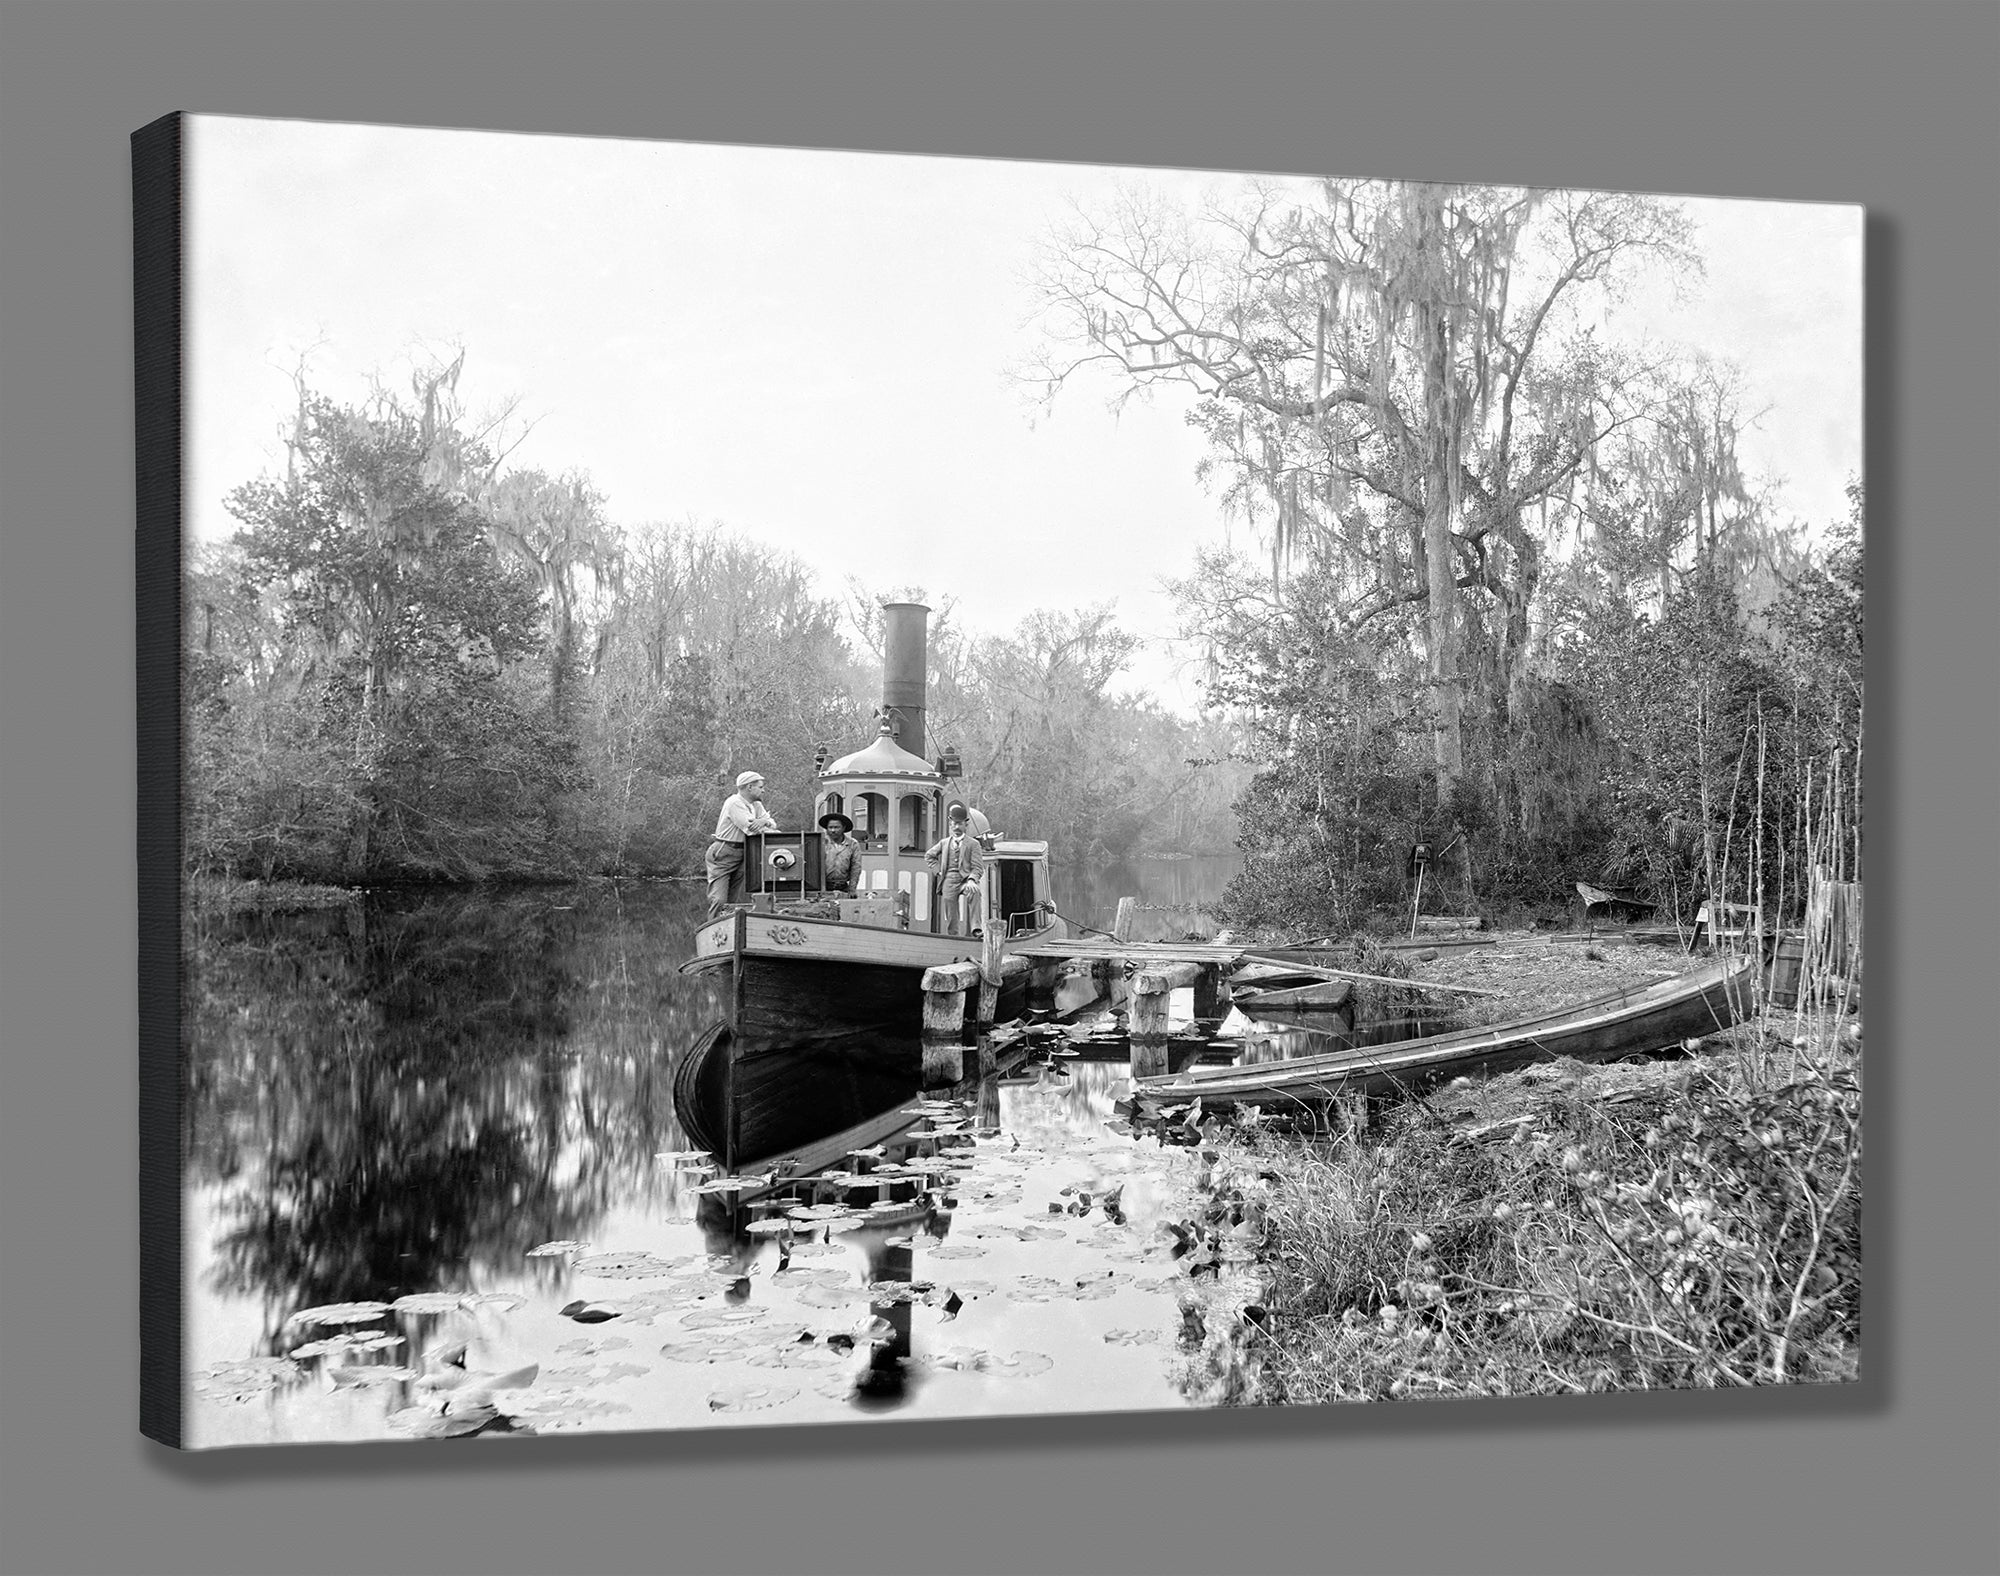 A canvas print of a vintage photograph of a boat in Rice Creek